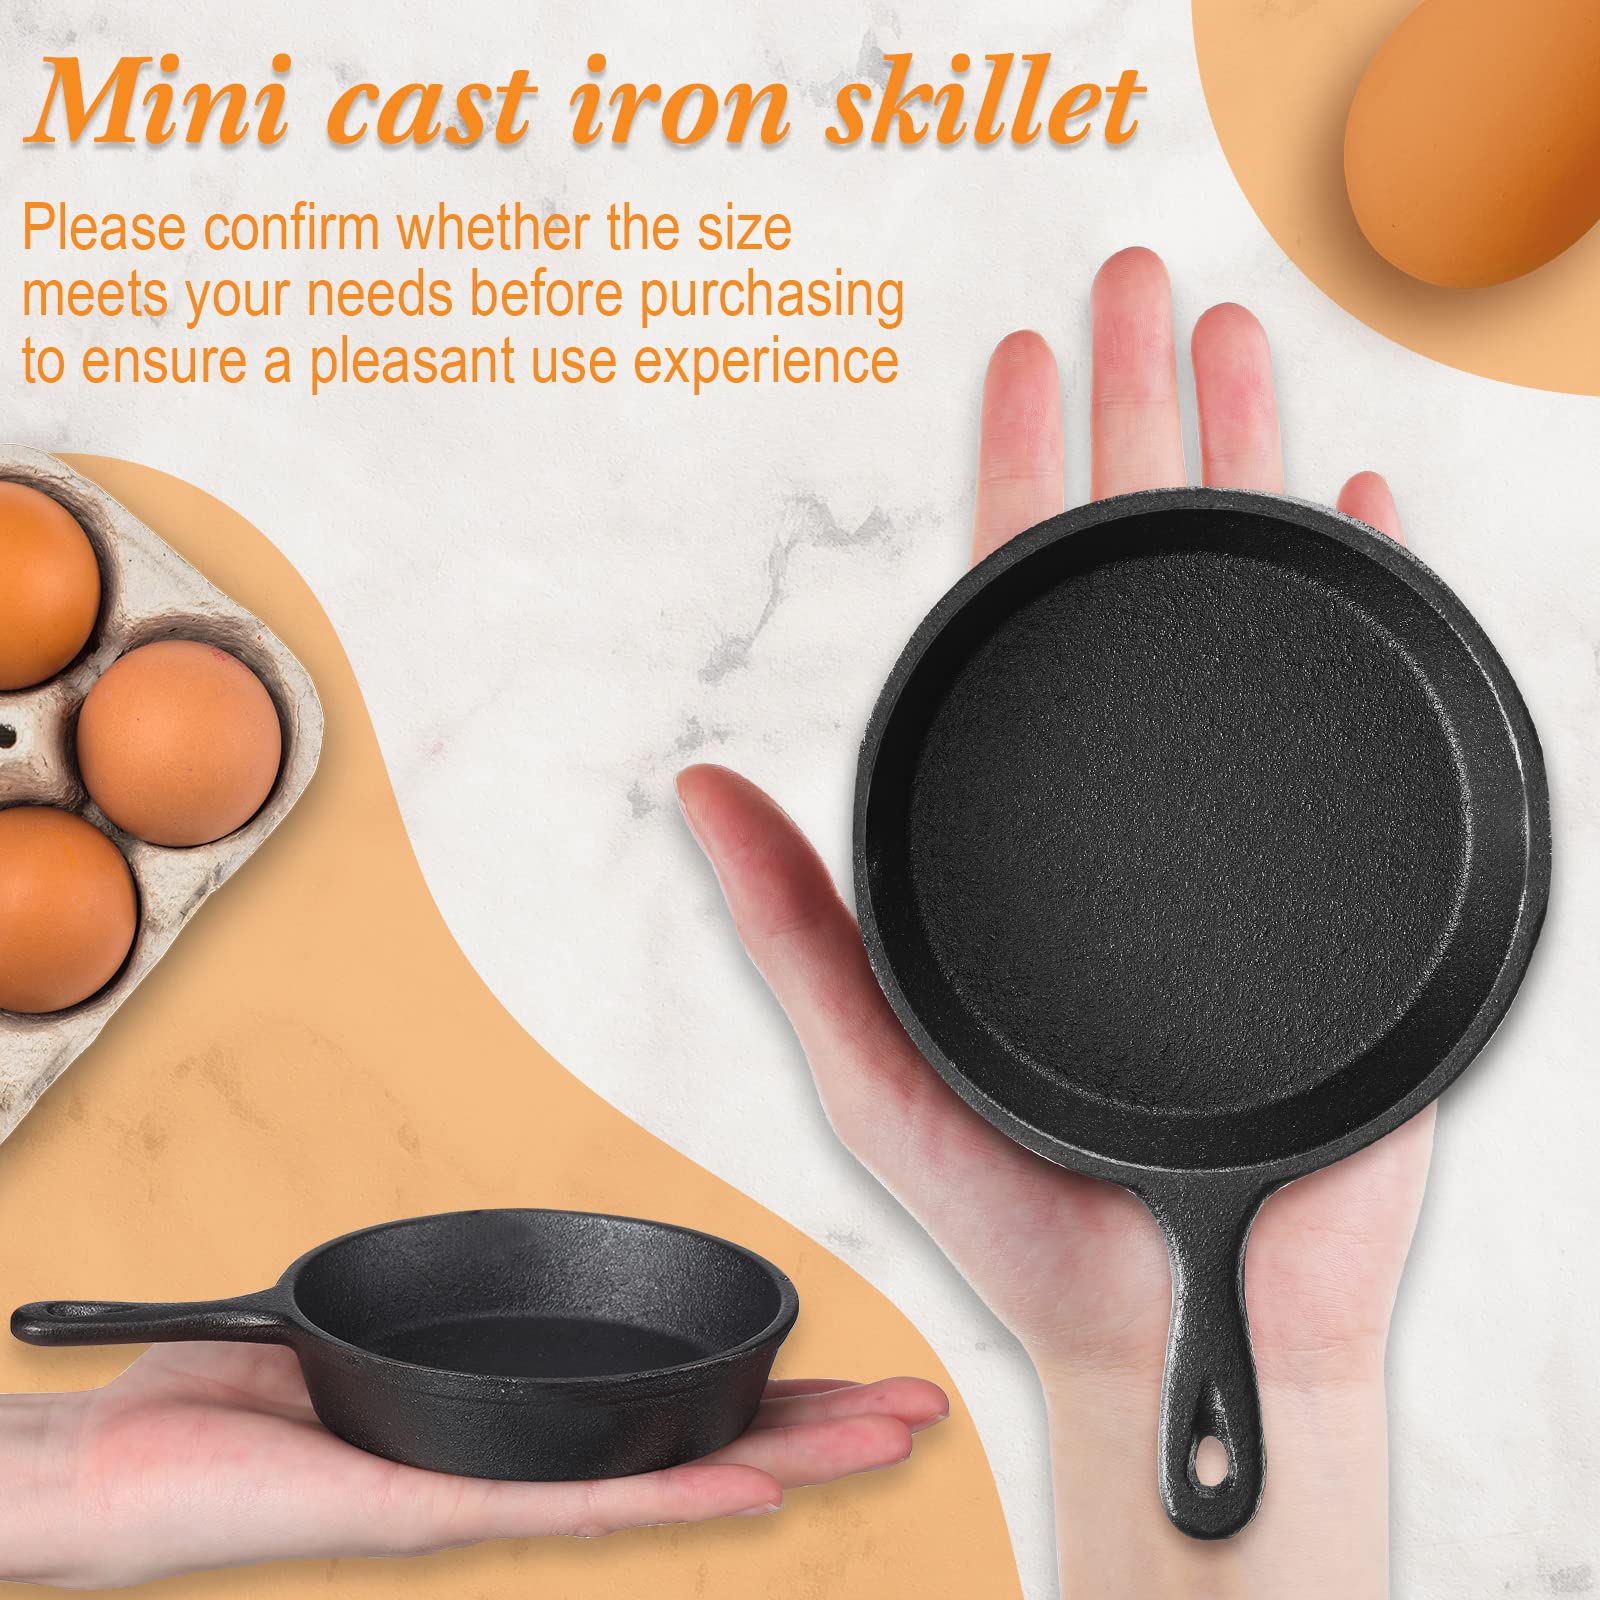 Remerry 4 Inches Cast Iron Skillets Mini Black Iron Nonstick Frying Pan Small Sizzling Plate Egg Pan Cast Iron Pot Bundle with Oil Brush for Indoor and Outdoor Restaurant Kitchen